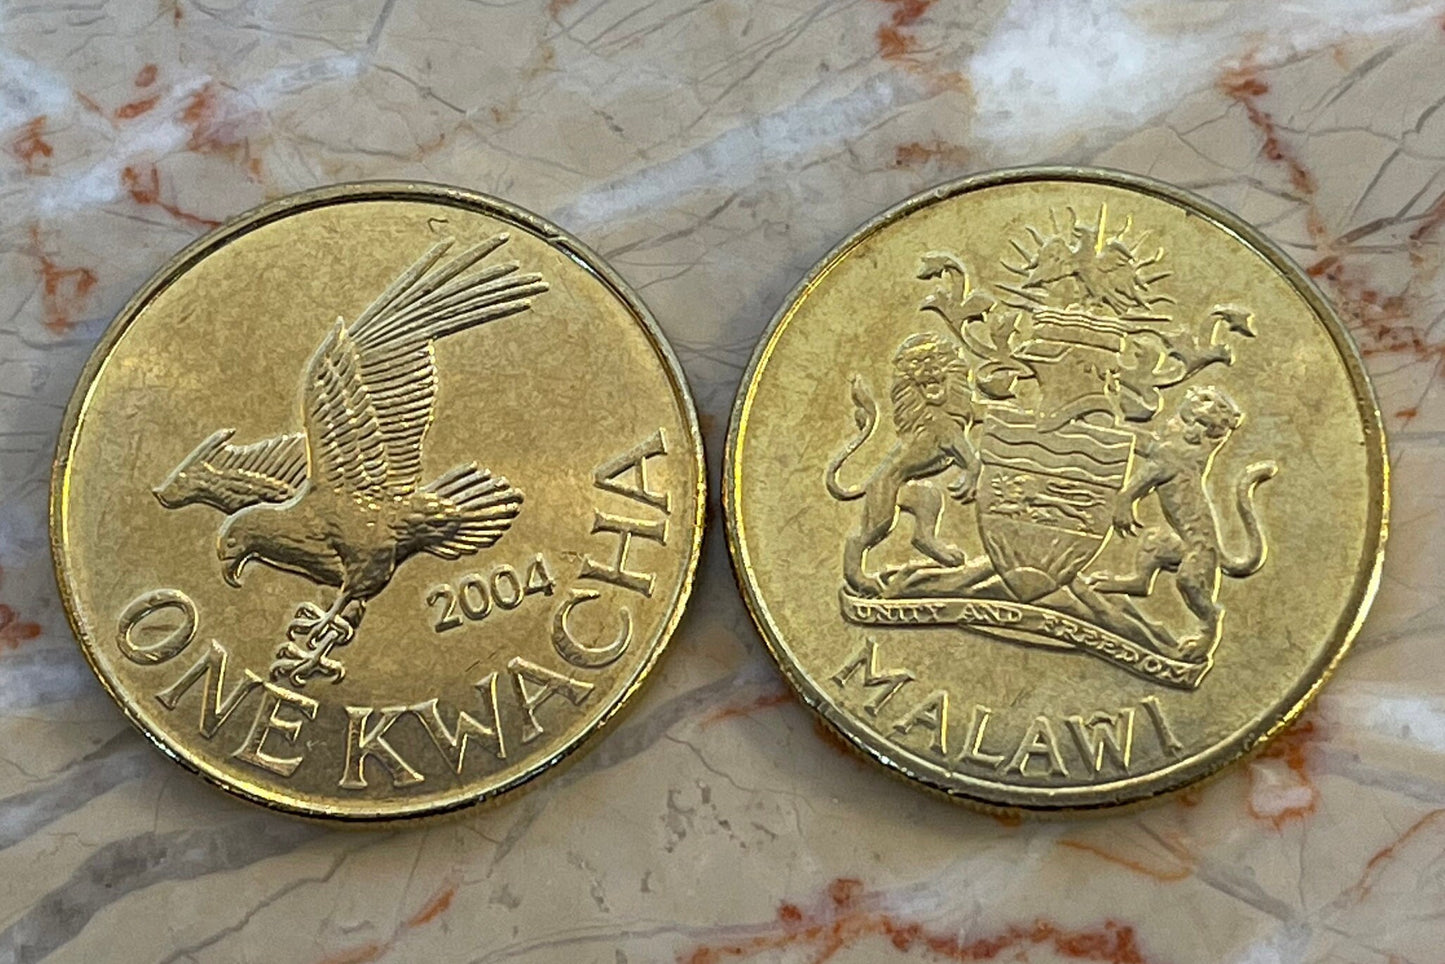 African Fish Eagle Malawi 1 Kwacha Authentic Coin Money for Jewelry and Craft Making